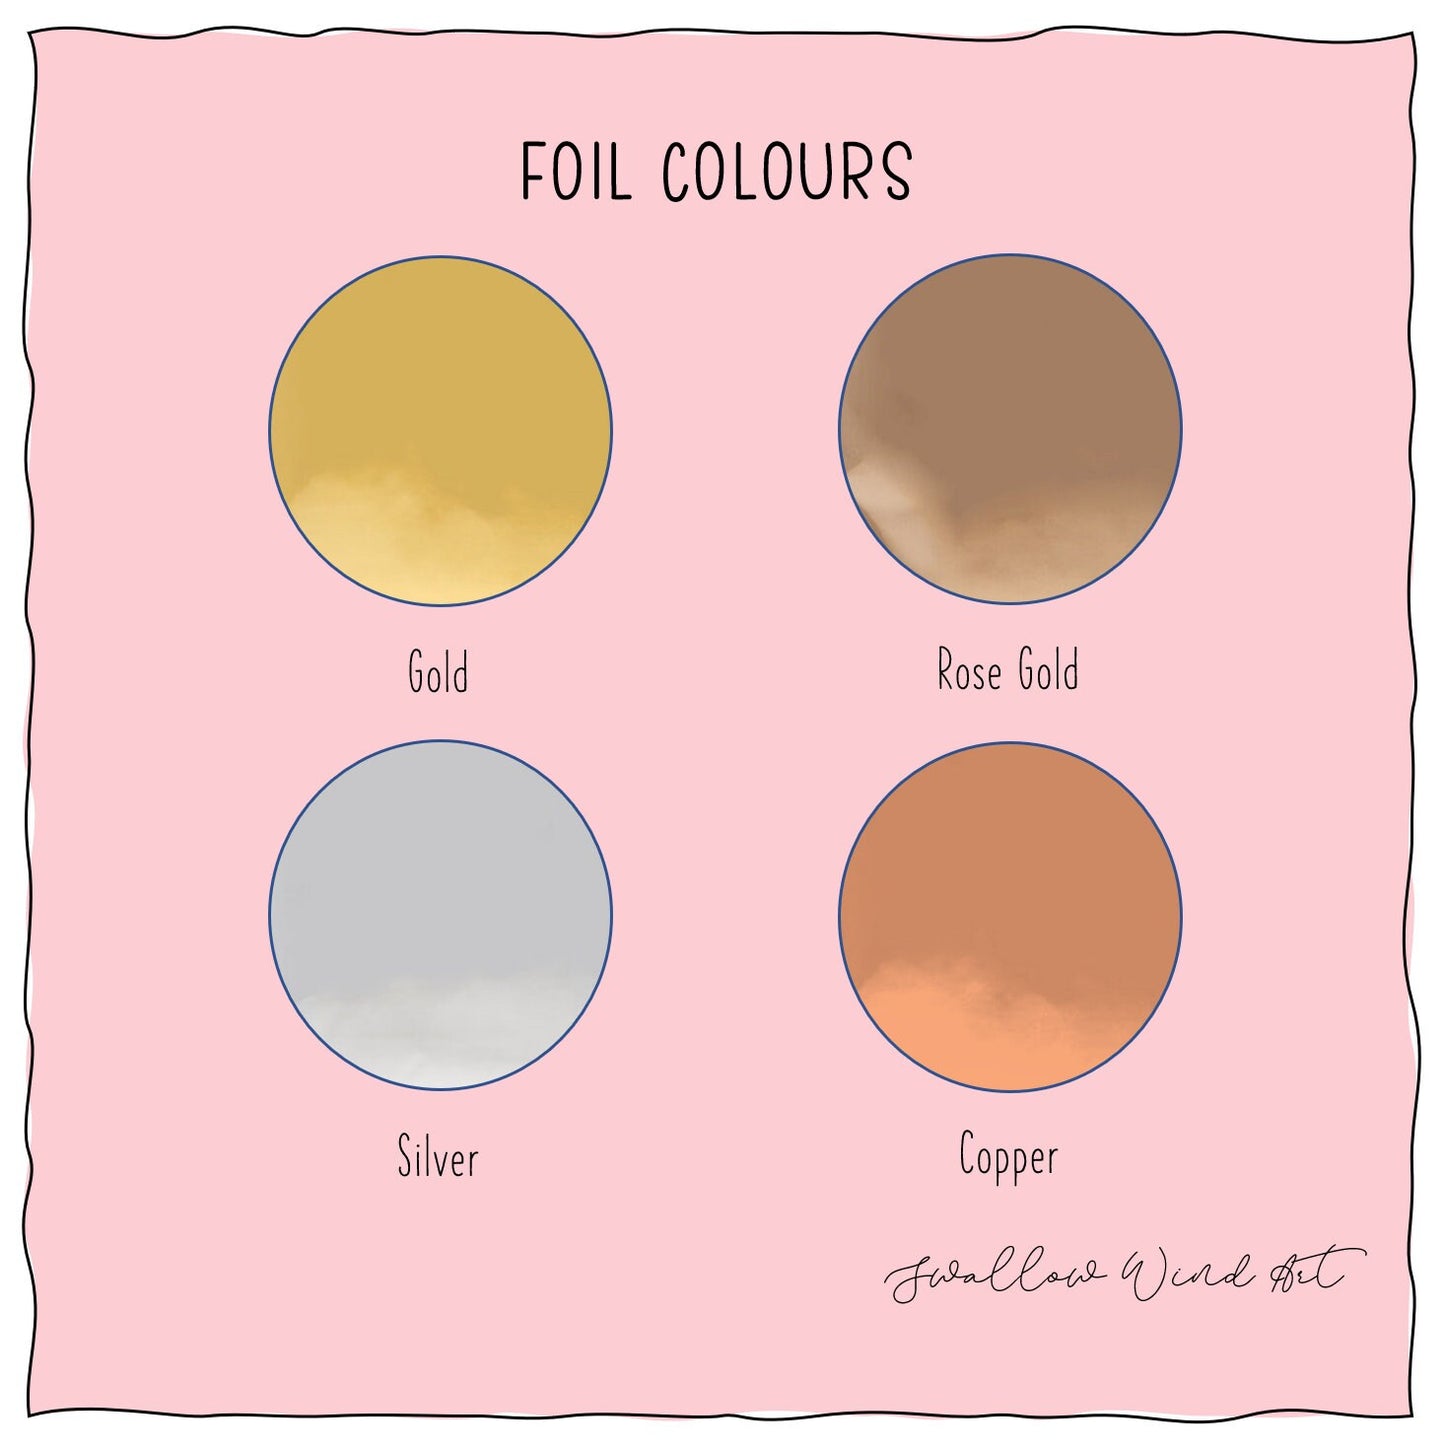 Foil colours of gold, rose gold, silver and copper